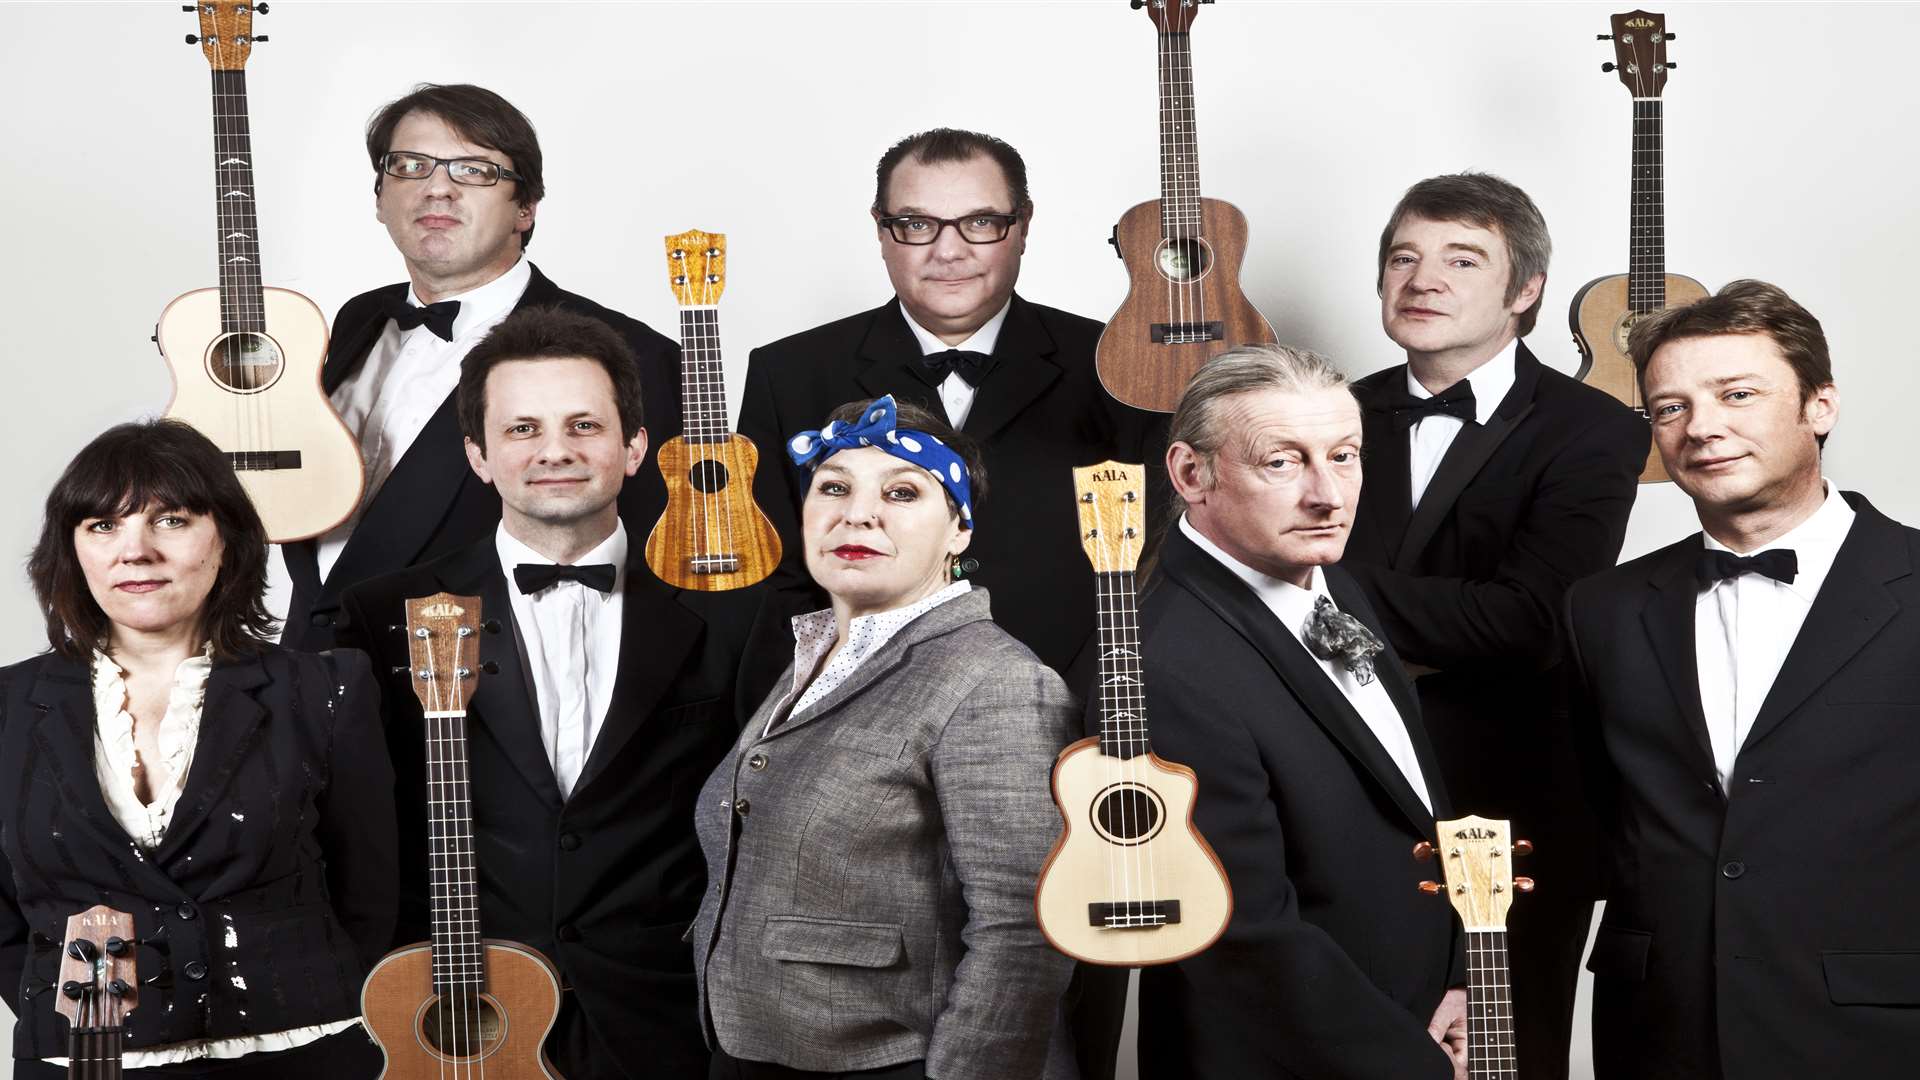 The Ukulele Orchestra of Great Britain, performing at three Kent venues this weekend